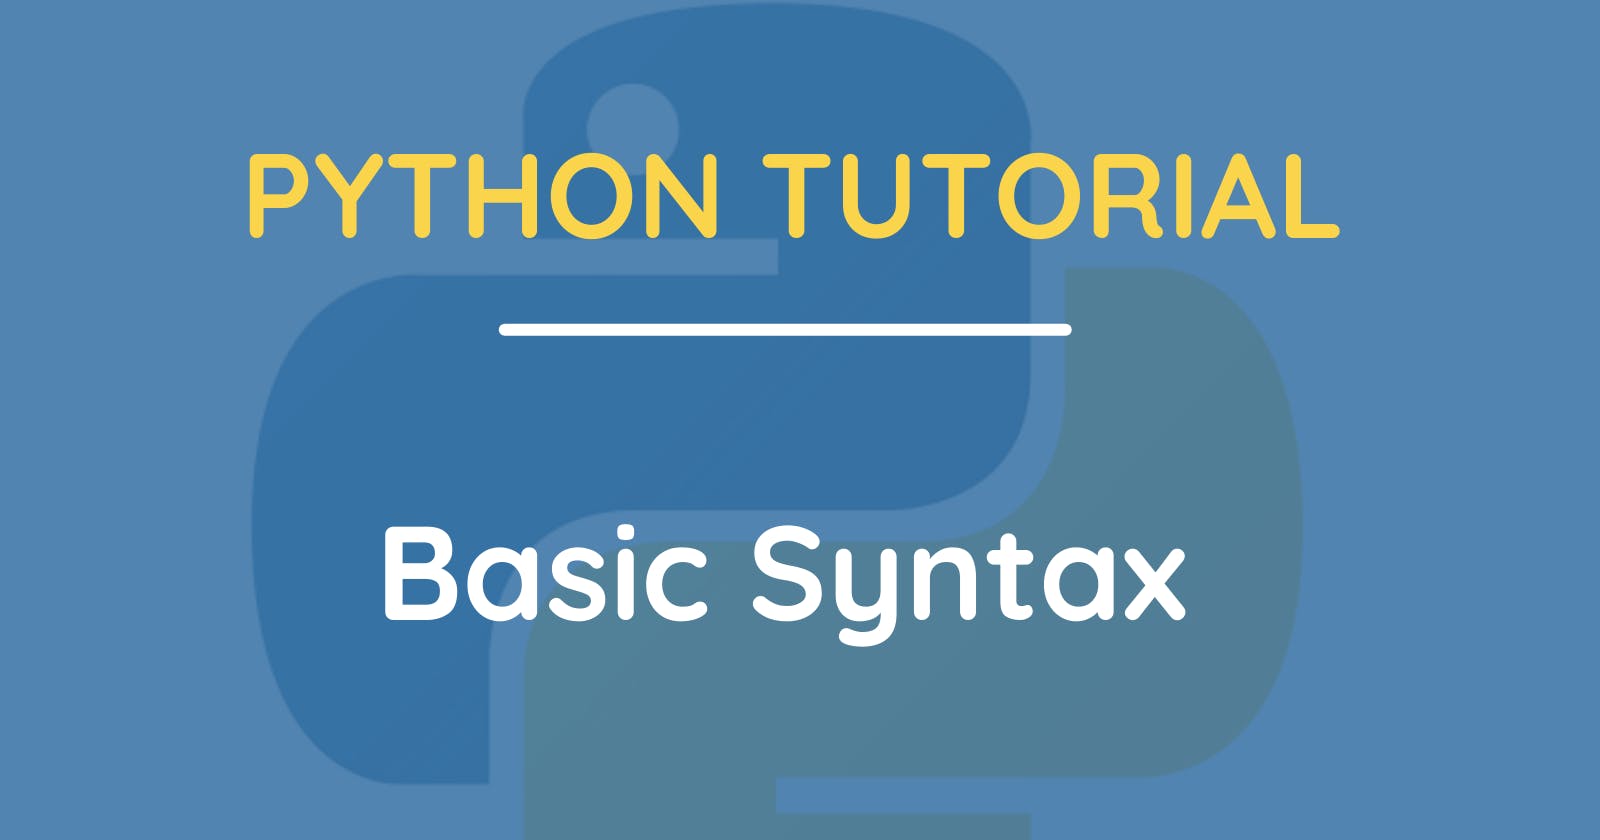 Python Tutorial: Basic Syntax - How To Work With Python